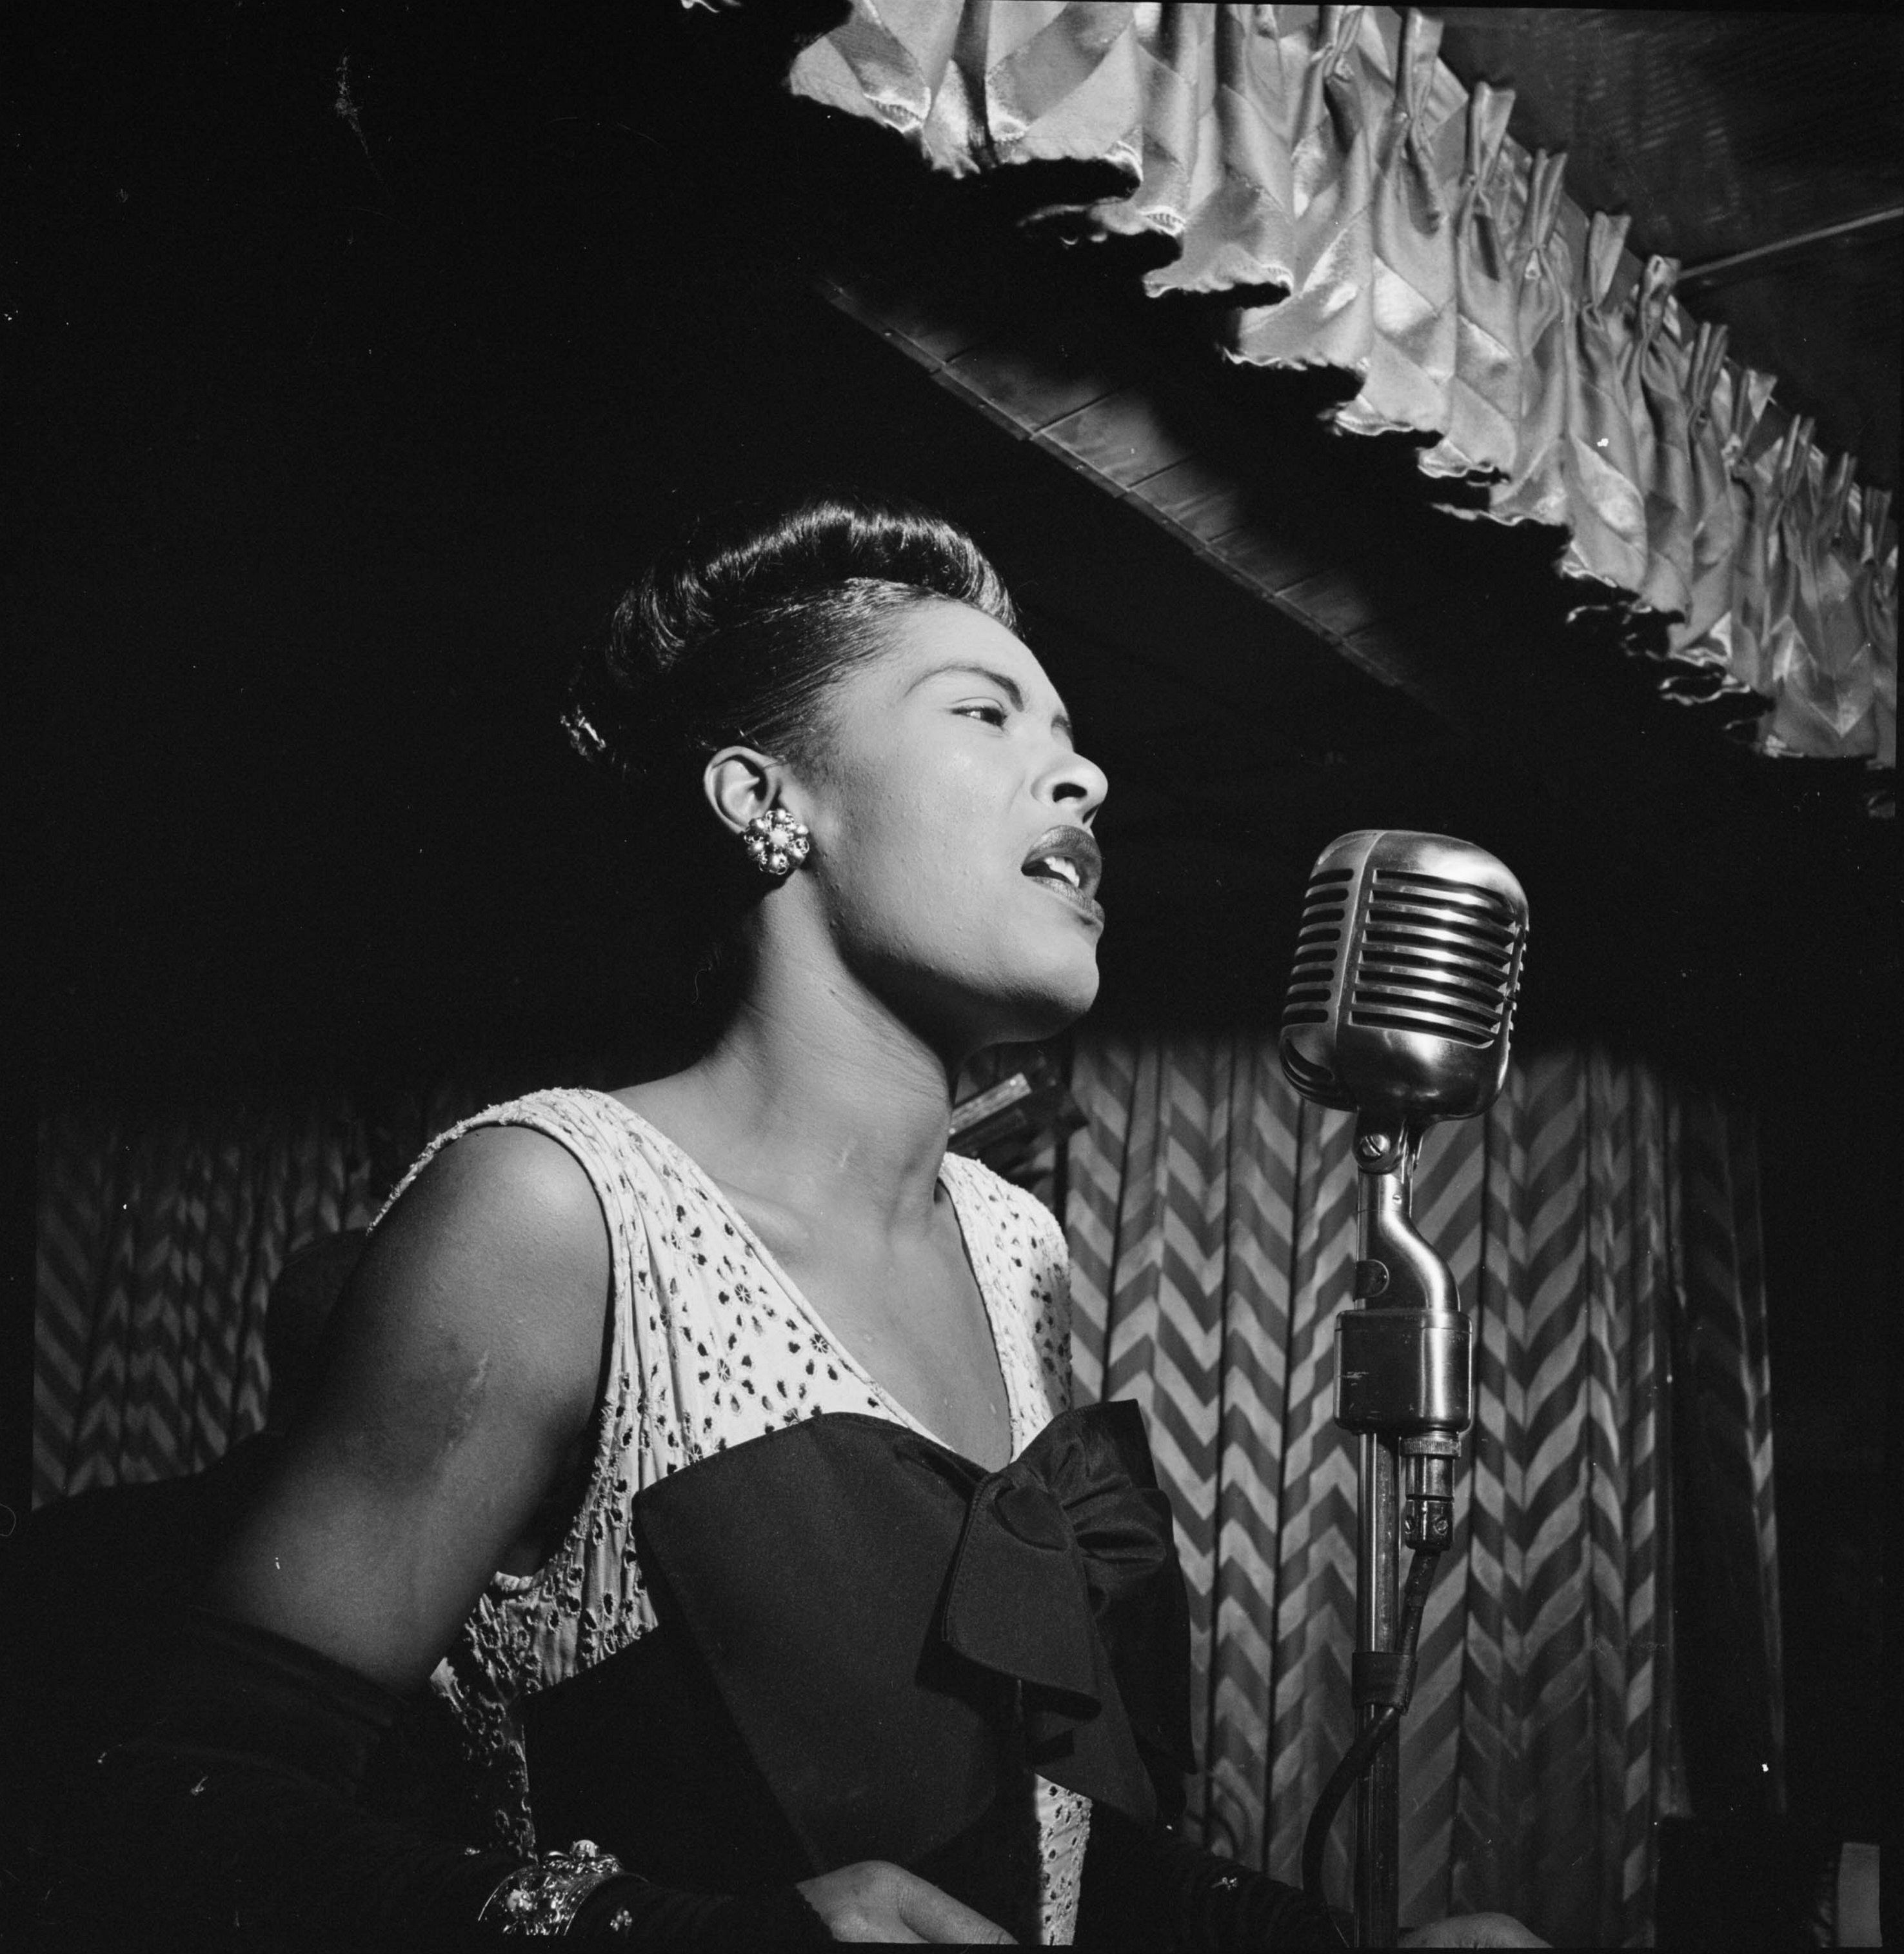 Billie Holiday performing at the Club Downbeat in Manhattan in 1947 | Source: Getty Images